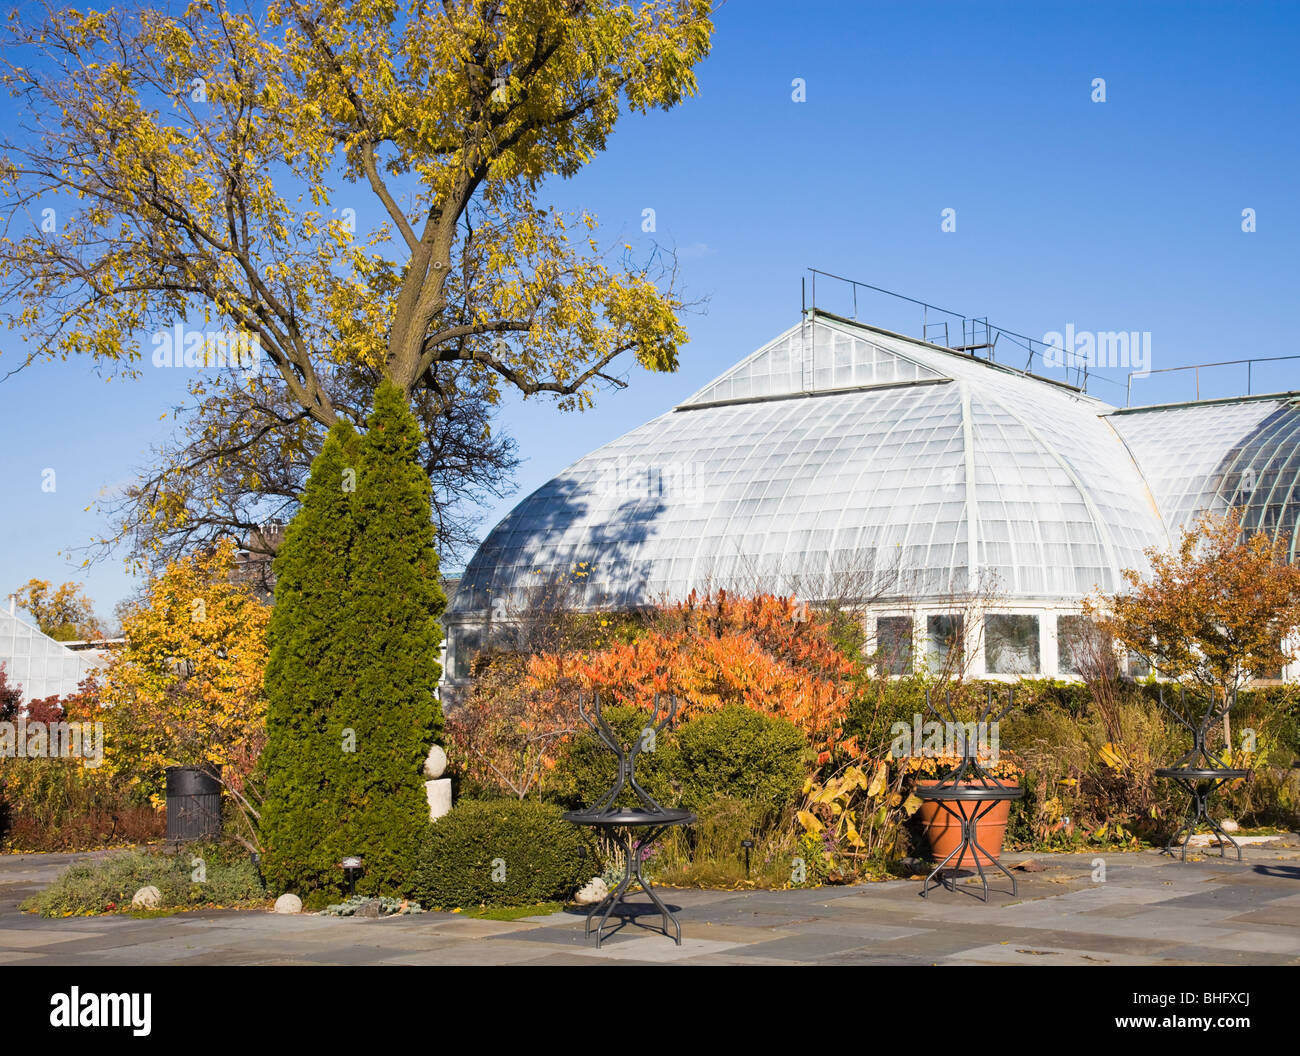 Garfield Park Conservatory in Chicago Stock Photo Alamy